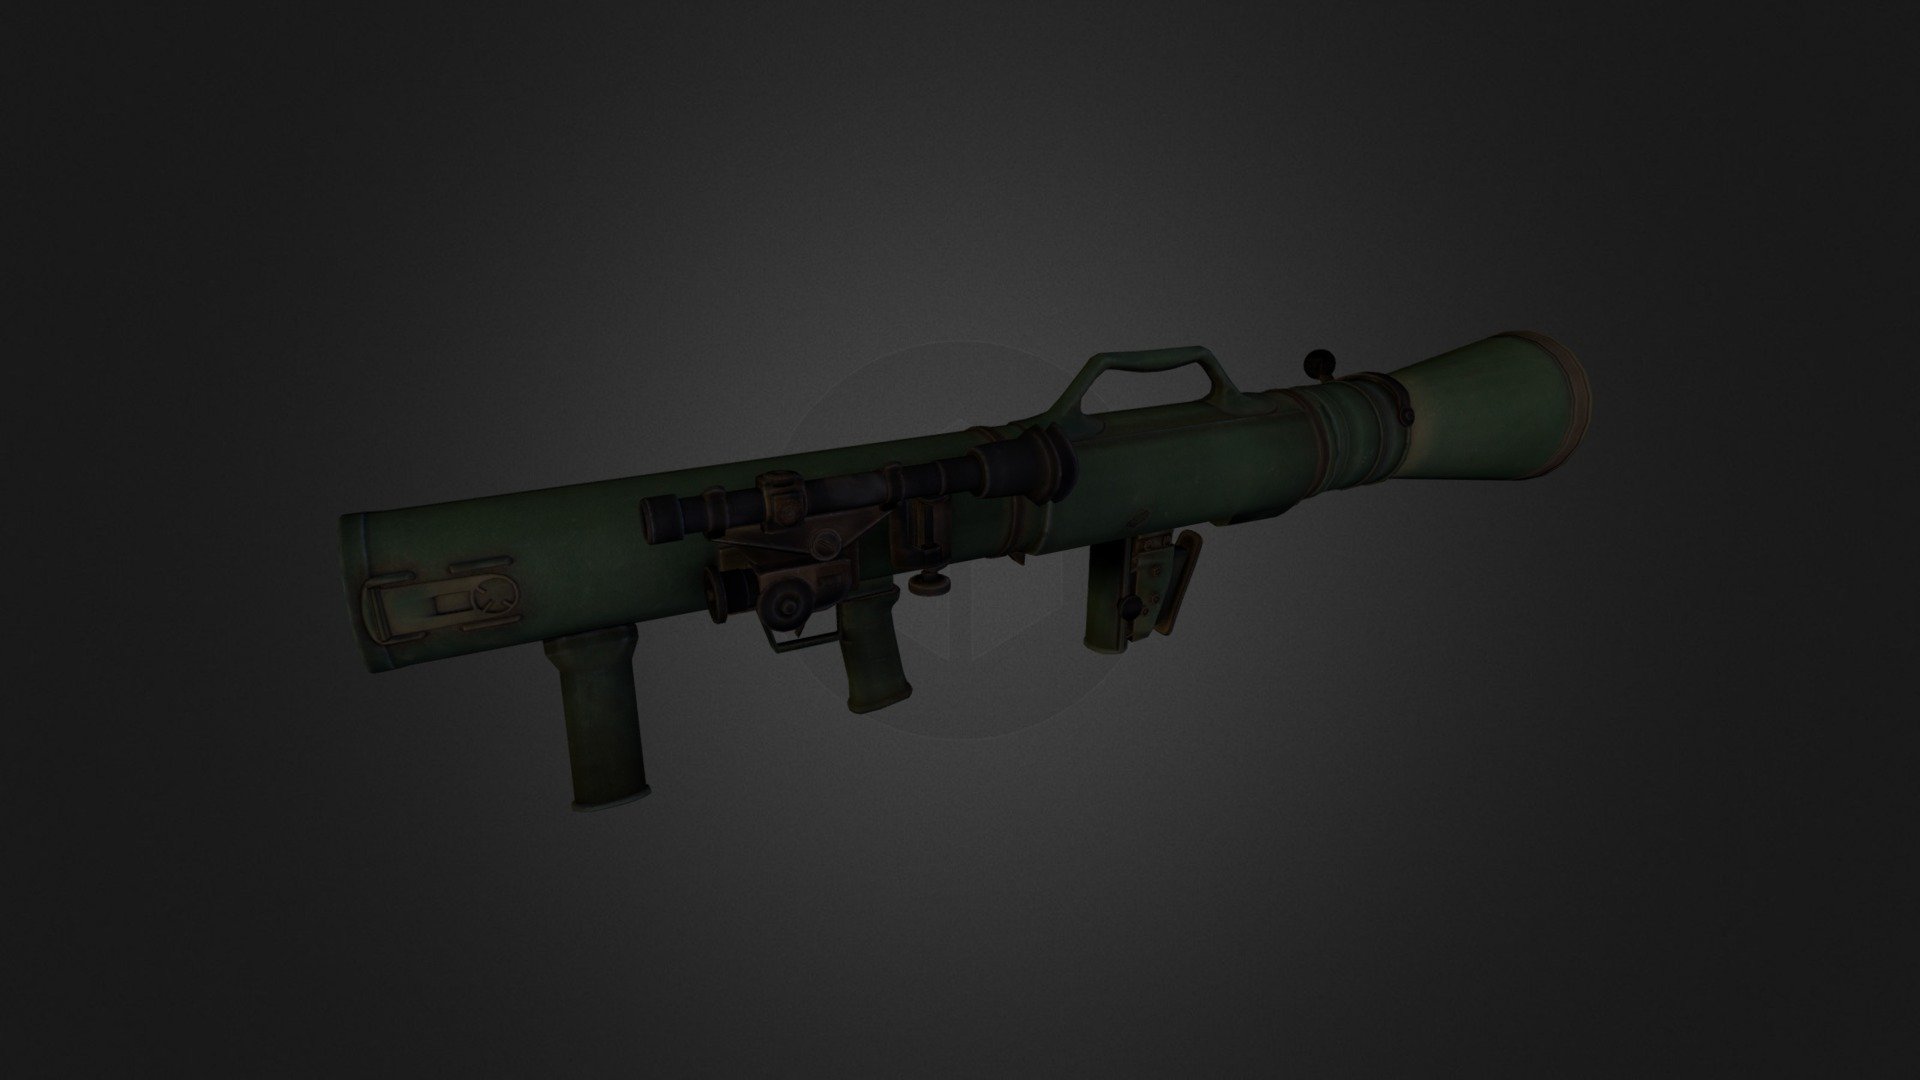 Carl Gustaf launcher for the Swedish forces pack for Arma 3. http://forums.bistudio.com/showthread.php?152536-Swedish-Forces-Pack - Carl Gustaf m86  - 3D model by d0kefish 3d model